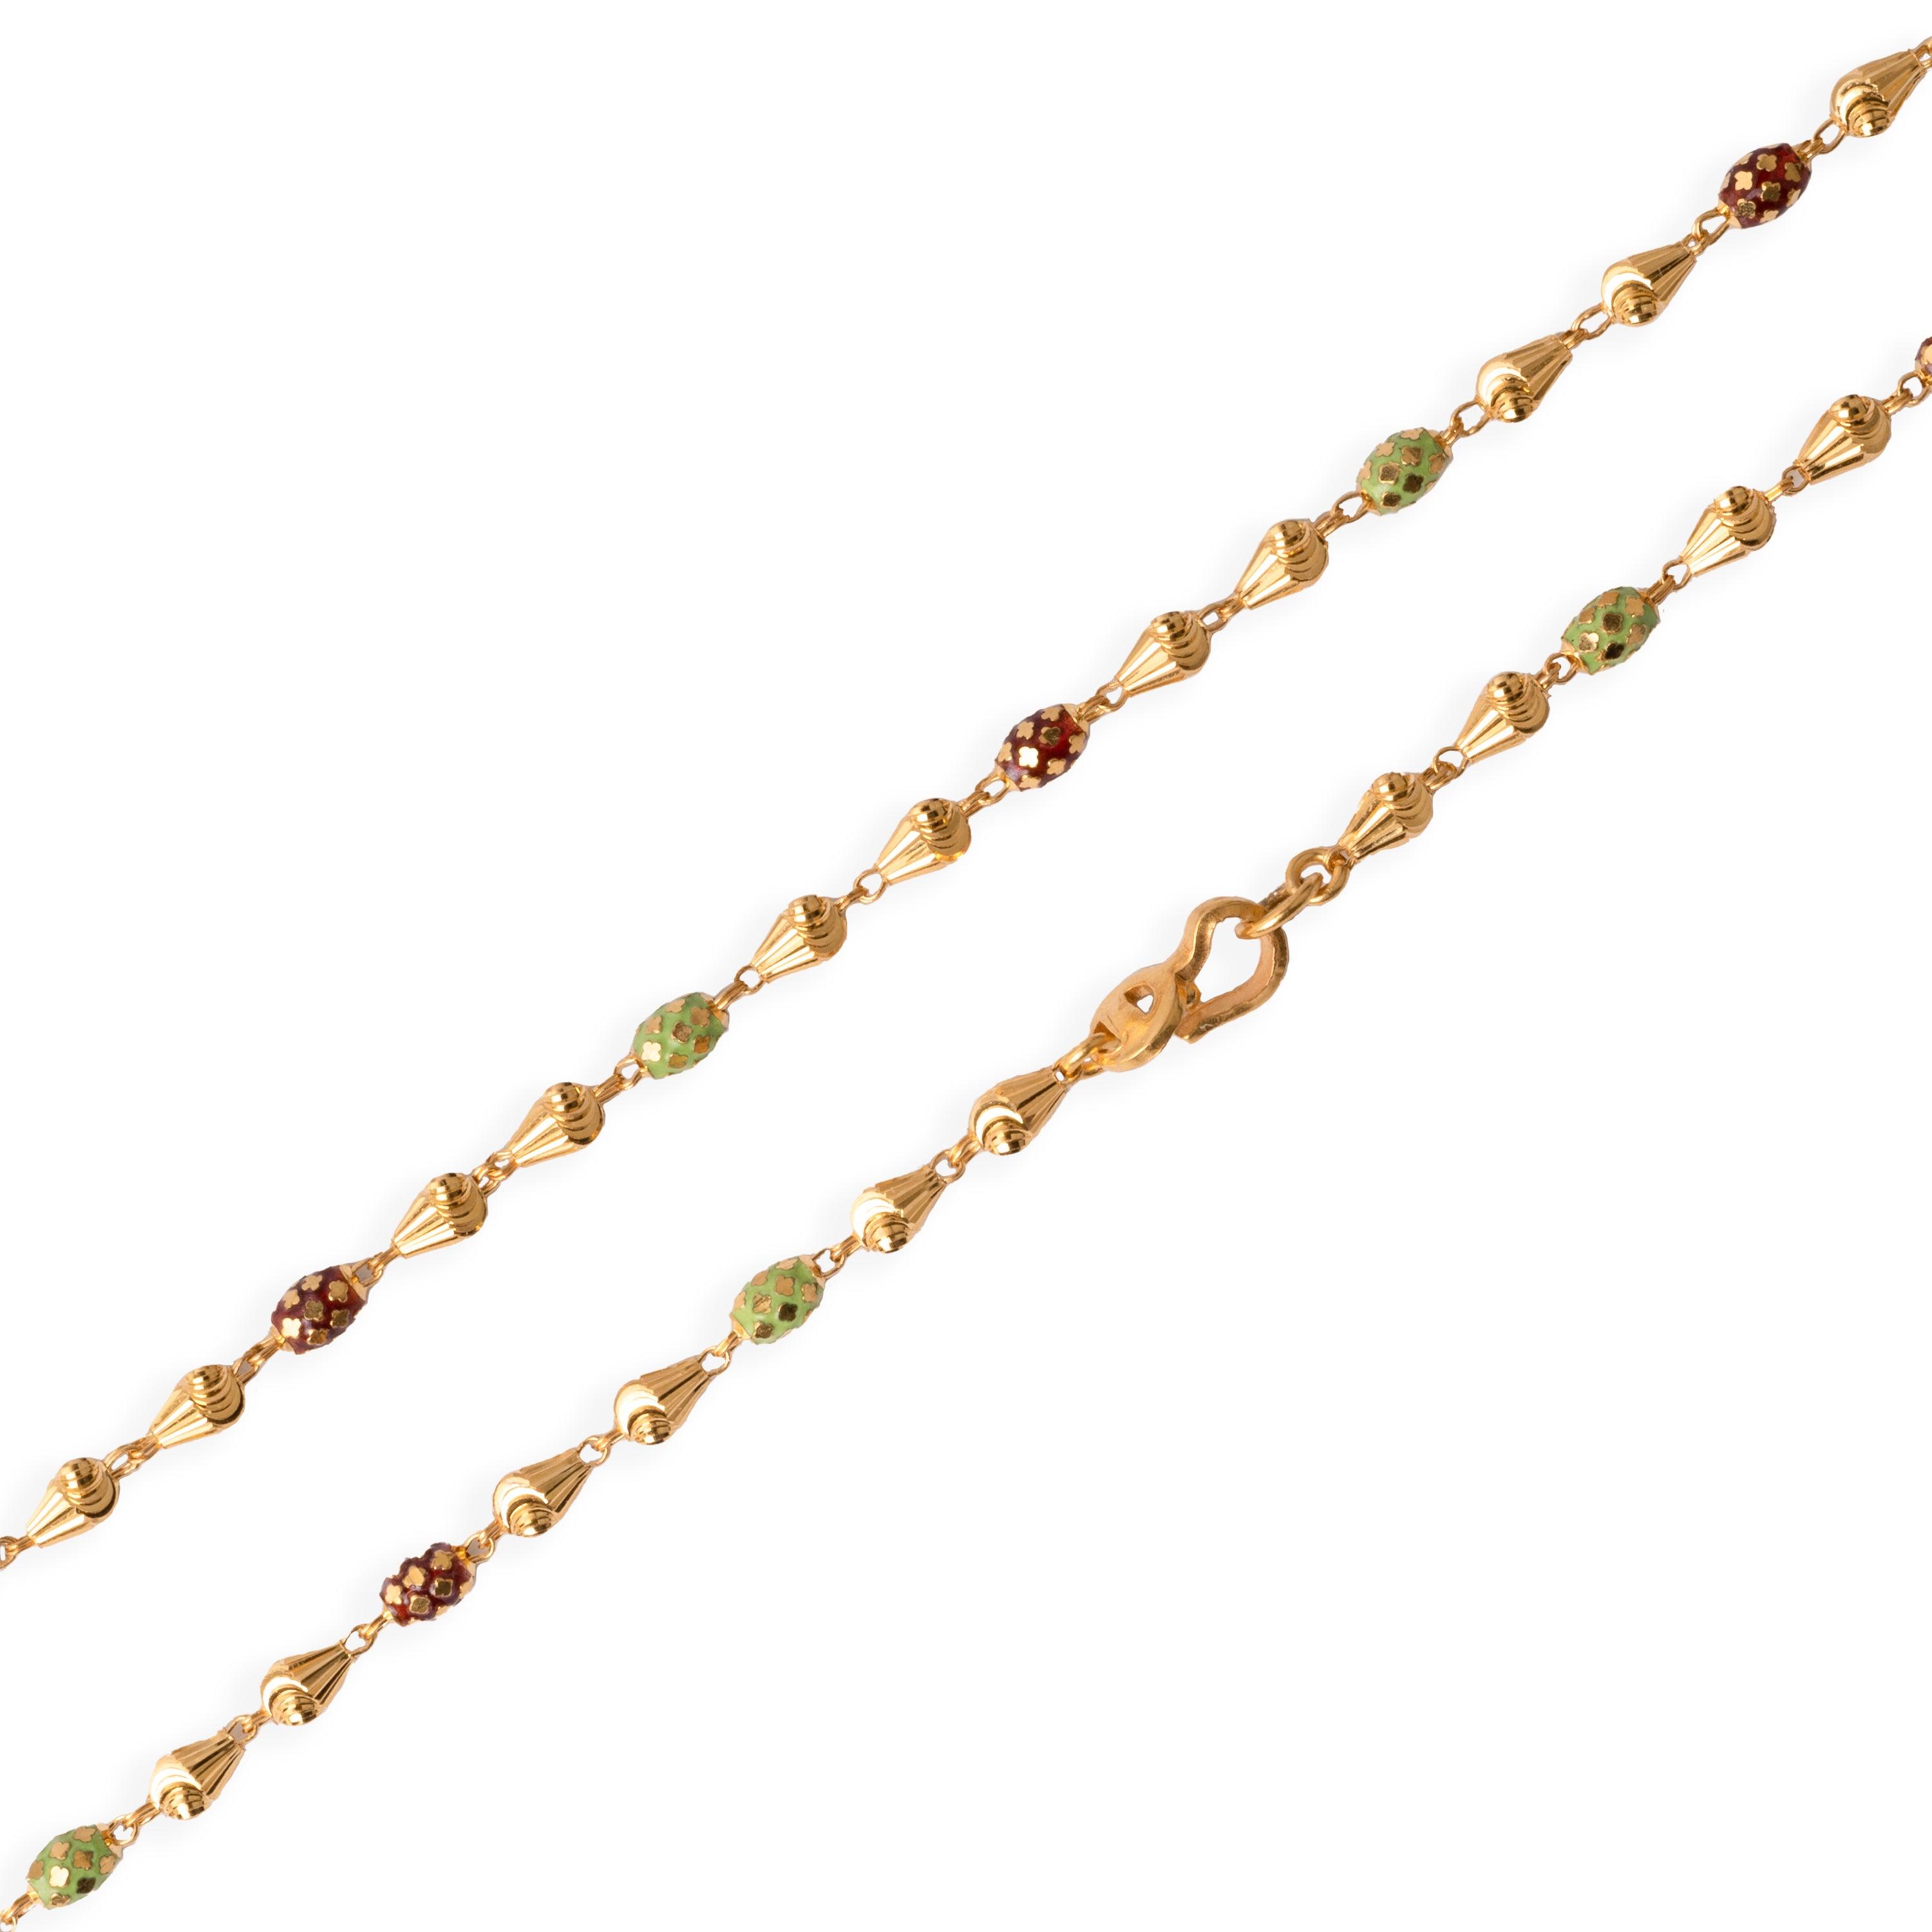 22ct Gold Beaded Necklace with Enamel Design and Hook Clasp C-7131 - Minar Jewellers